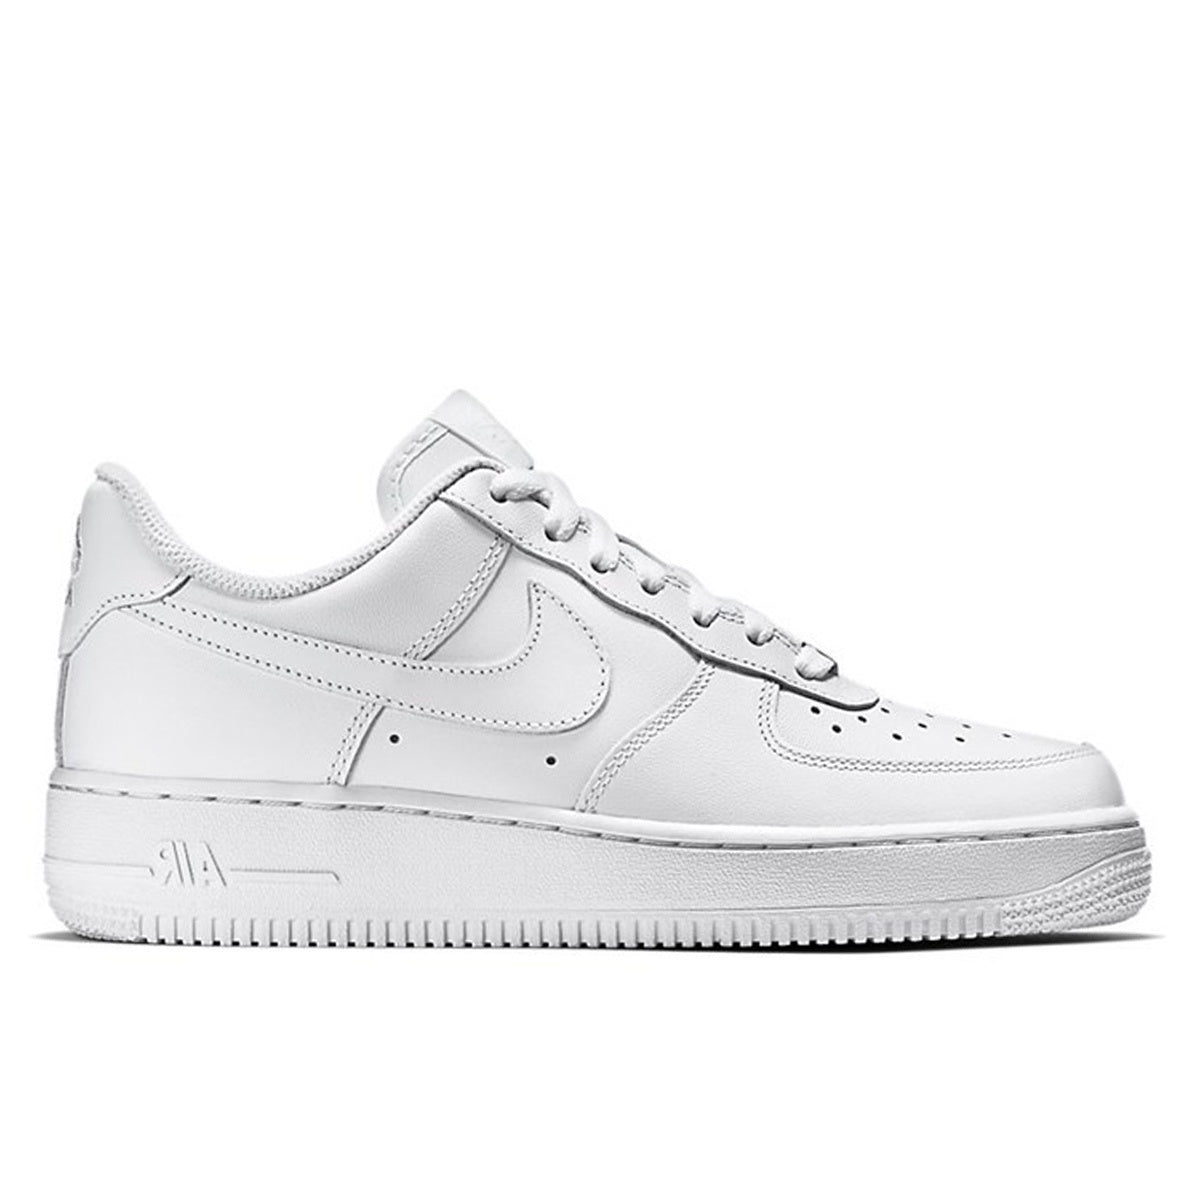 Men, Boys, Teens, Gifts, Wmns, Girls, Urban, Style, Fashion, Men's Shoes, Sneakers, Running Shoes, Nike, Air Force 1, White Shoes, Women's Shoes, Shoes For Teens, Low Top Sneakers,